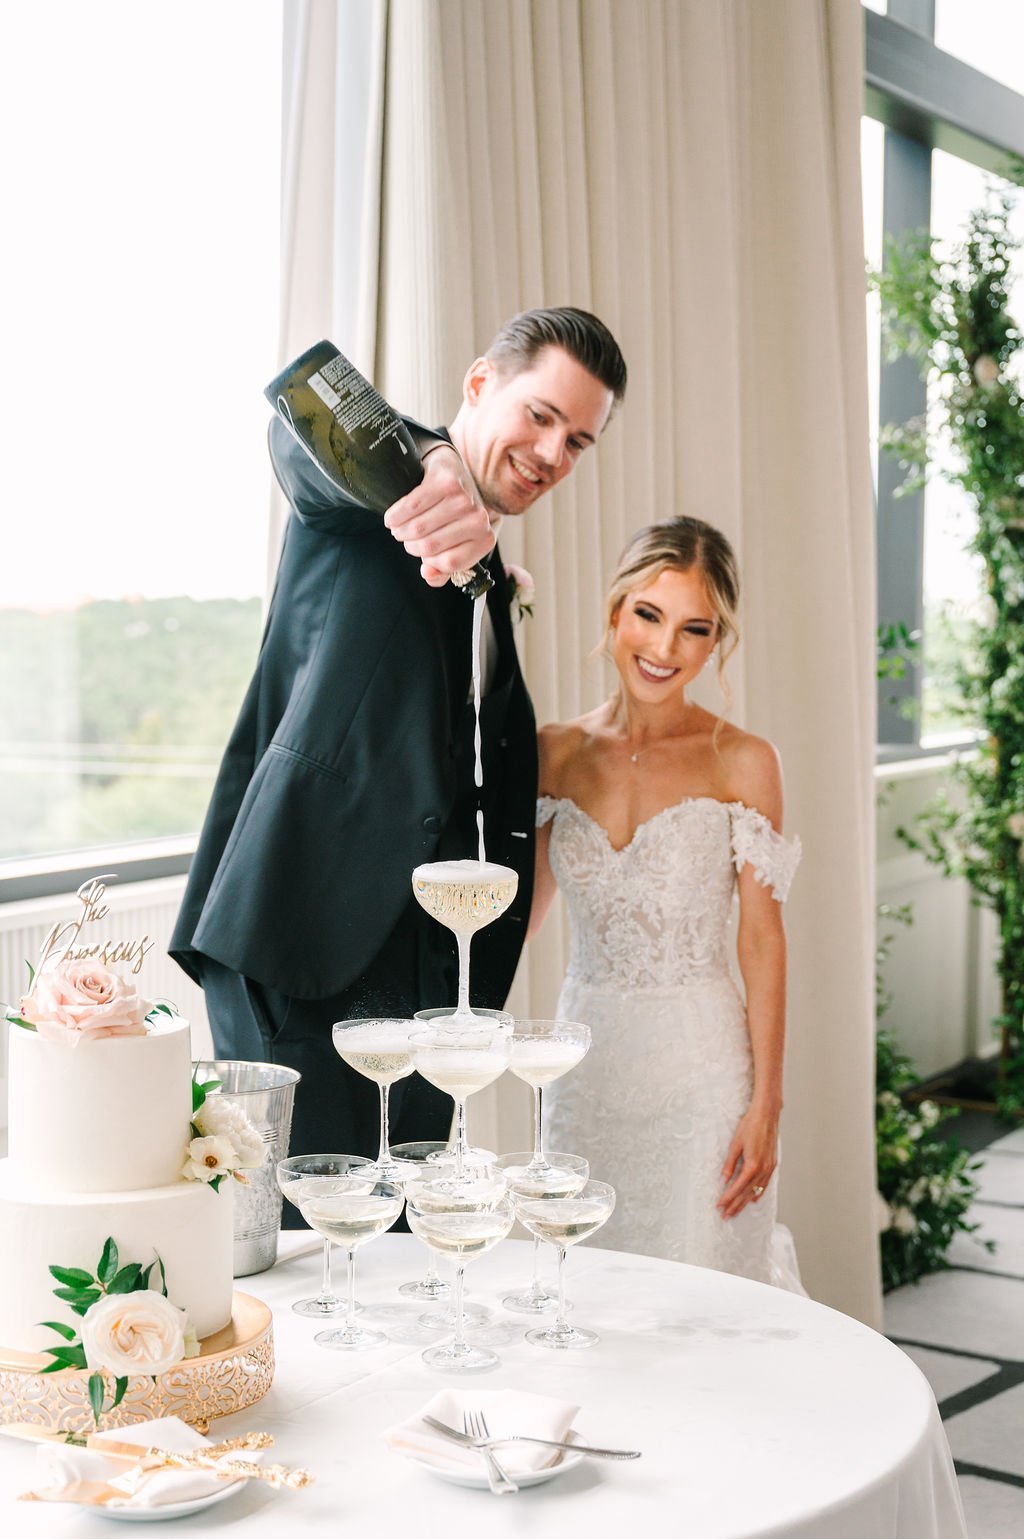 hayley-and-chris-romantic-rooftop-wedding-at-the-perry-lane-in-savannah-ga-featuring-organic-lush-wedding-florals-designed-by-ivory-and-beau-24.jpg